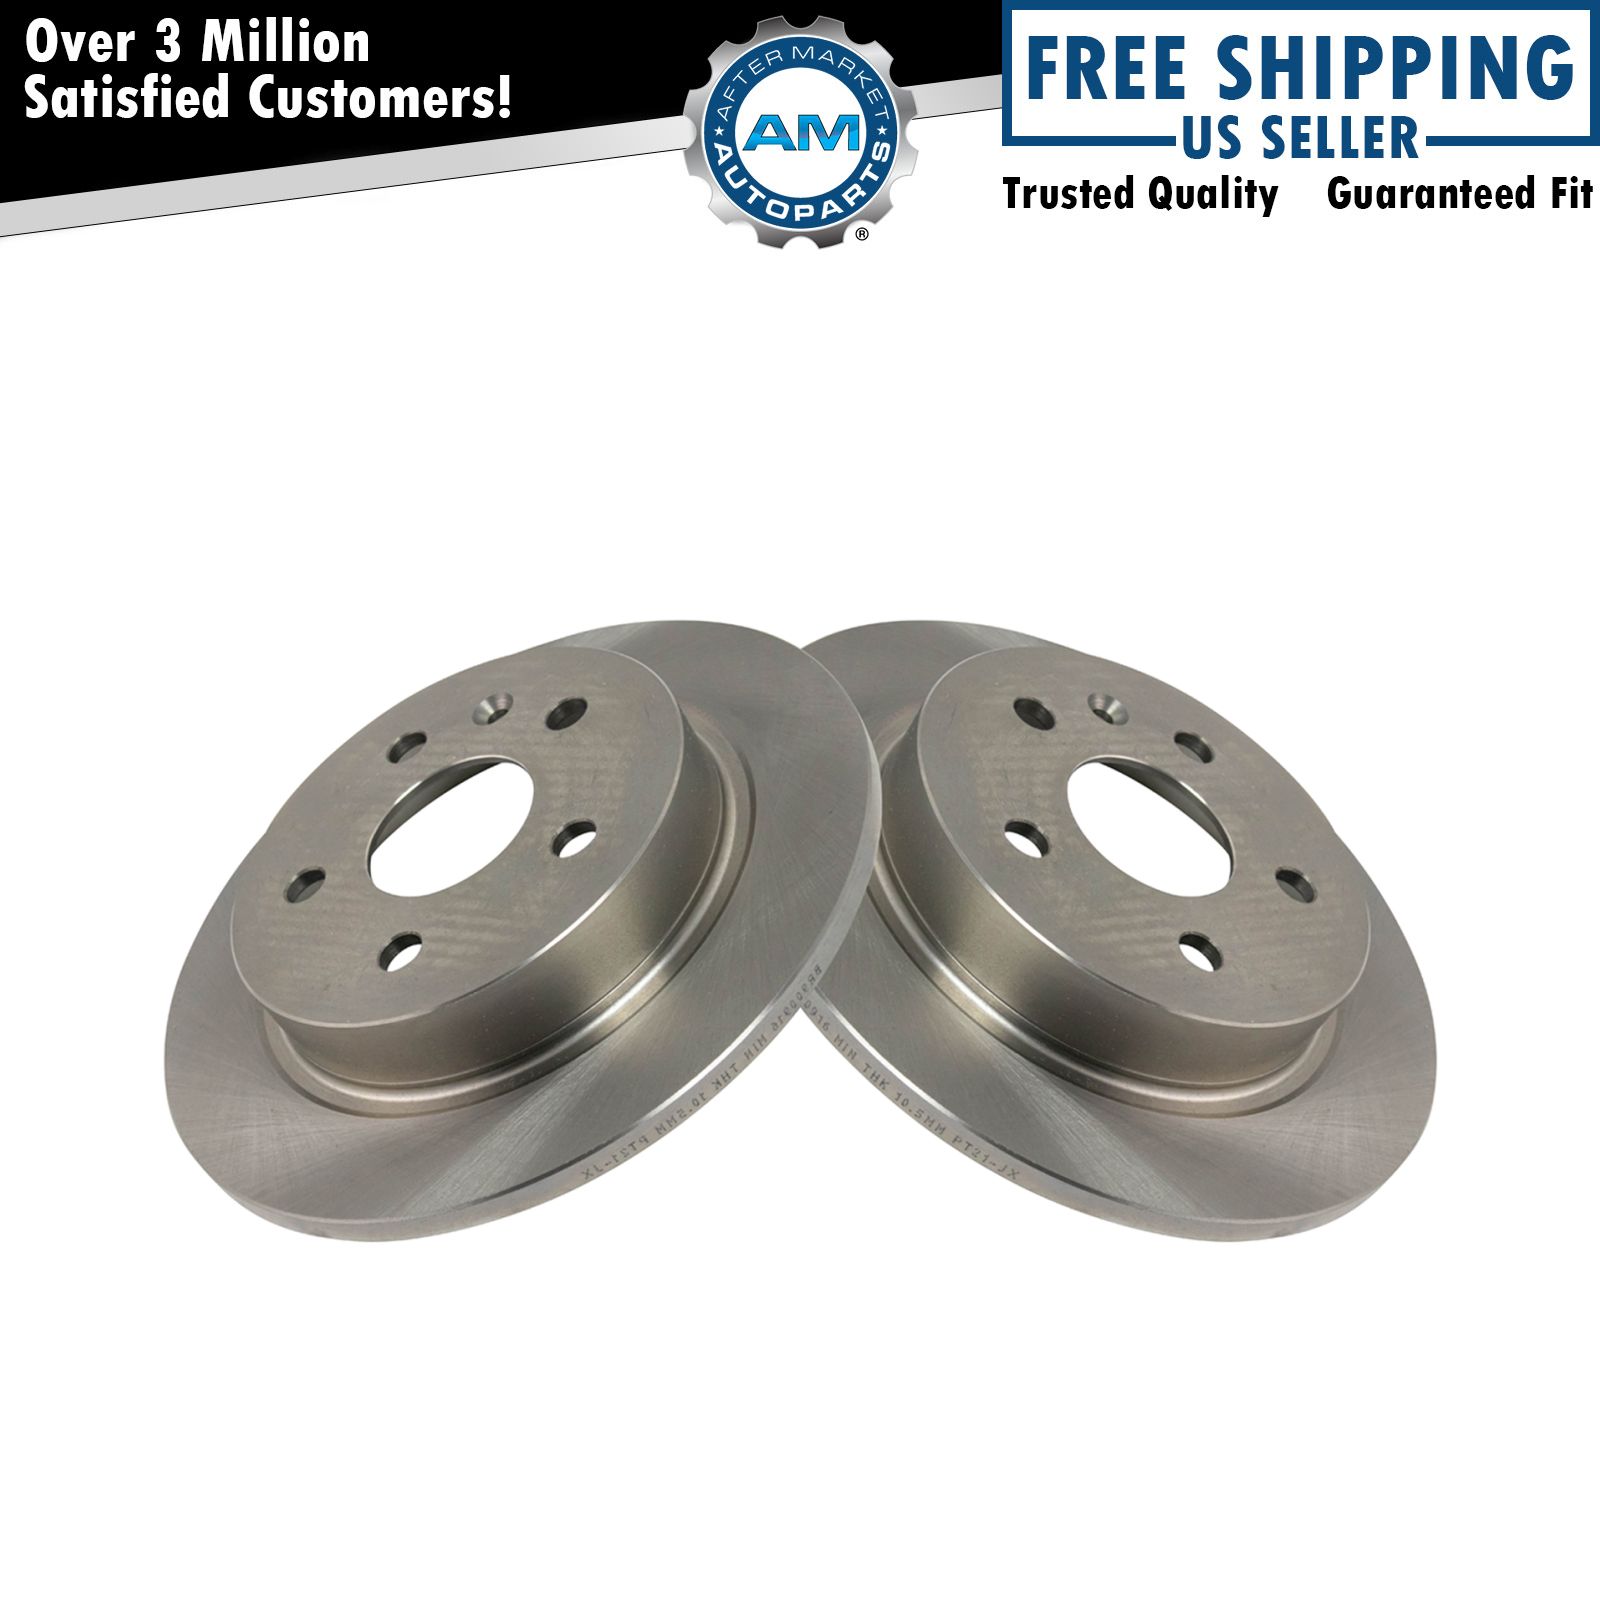 Rear Disc Brake Rotor LH RH Kit Pair Set of 2 for Buick Chevy